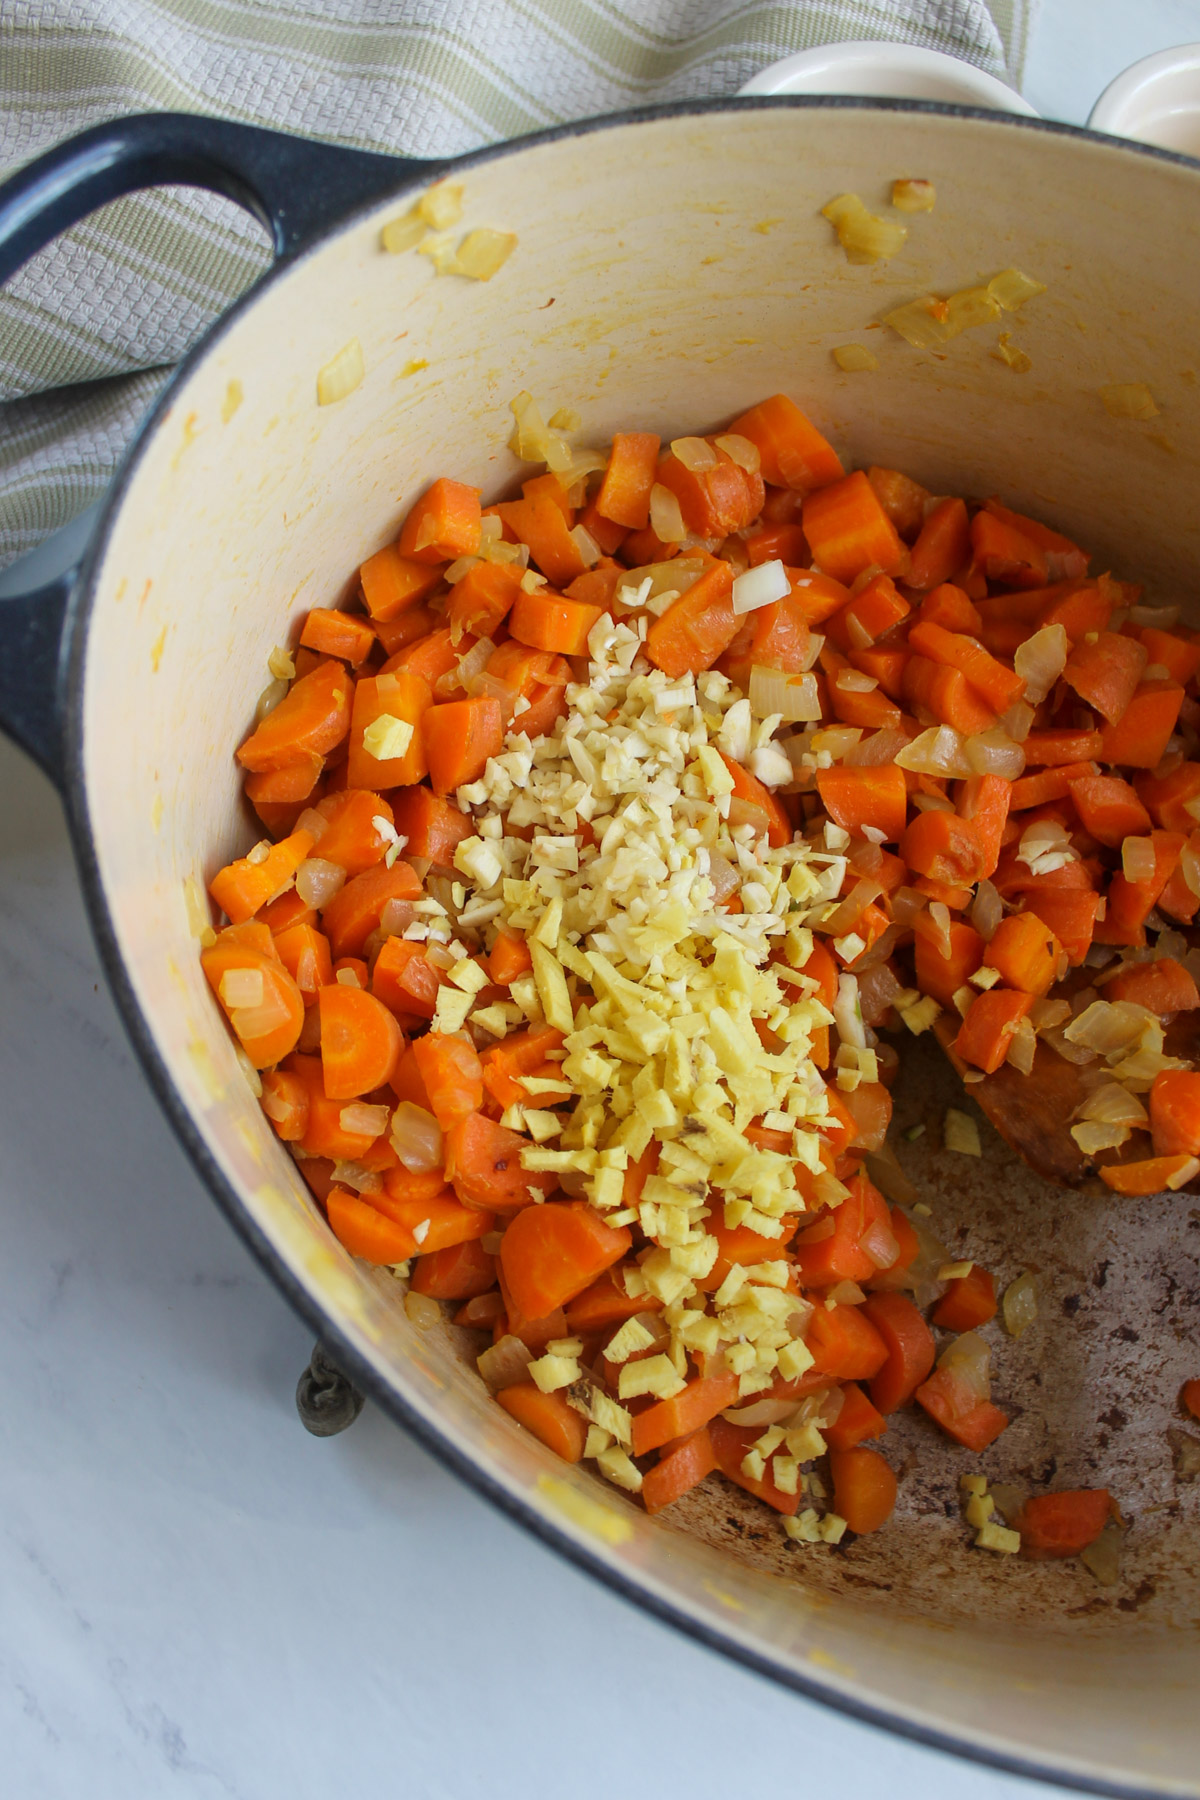 Adding fresh minced ginger and garlic to the carrots and onion.